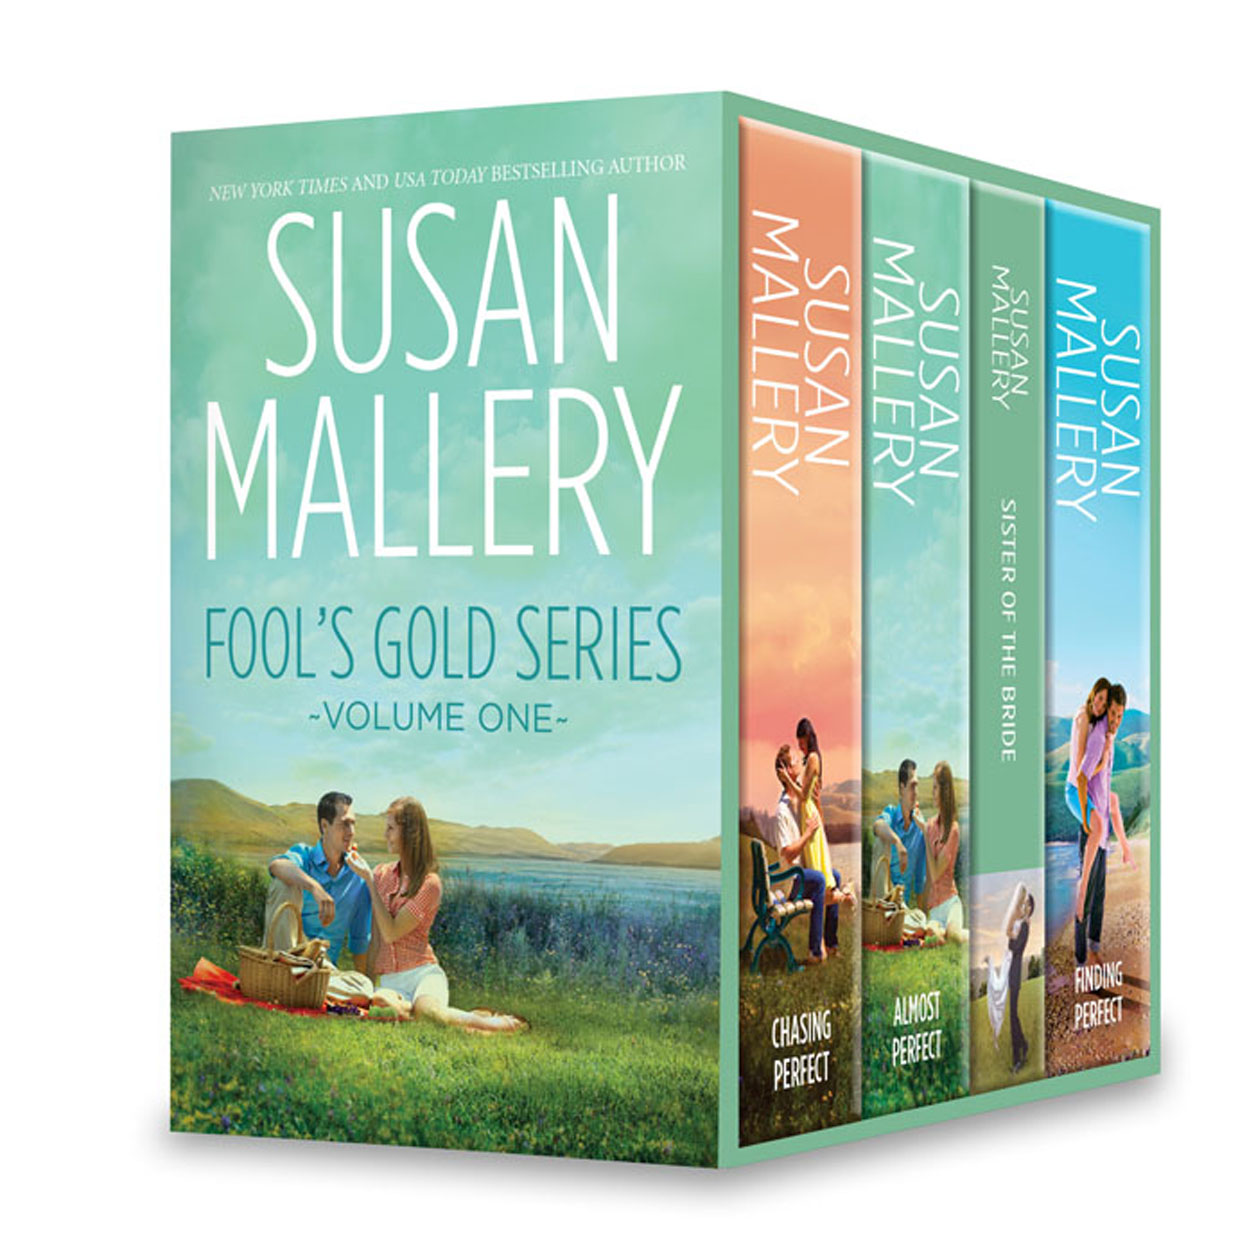 Susan Mallery Fool's Gold Series Volume One: Chasing Perfect\Almost Perfect\Sister of the Bride\Finding Perfect (2014) by Susan Mallery